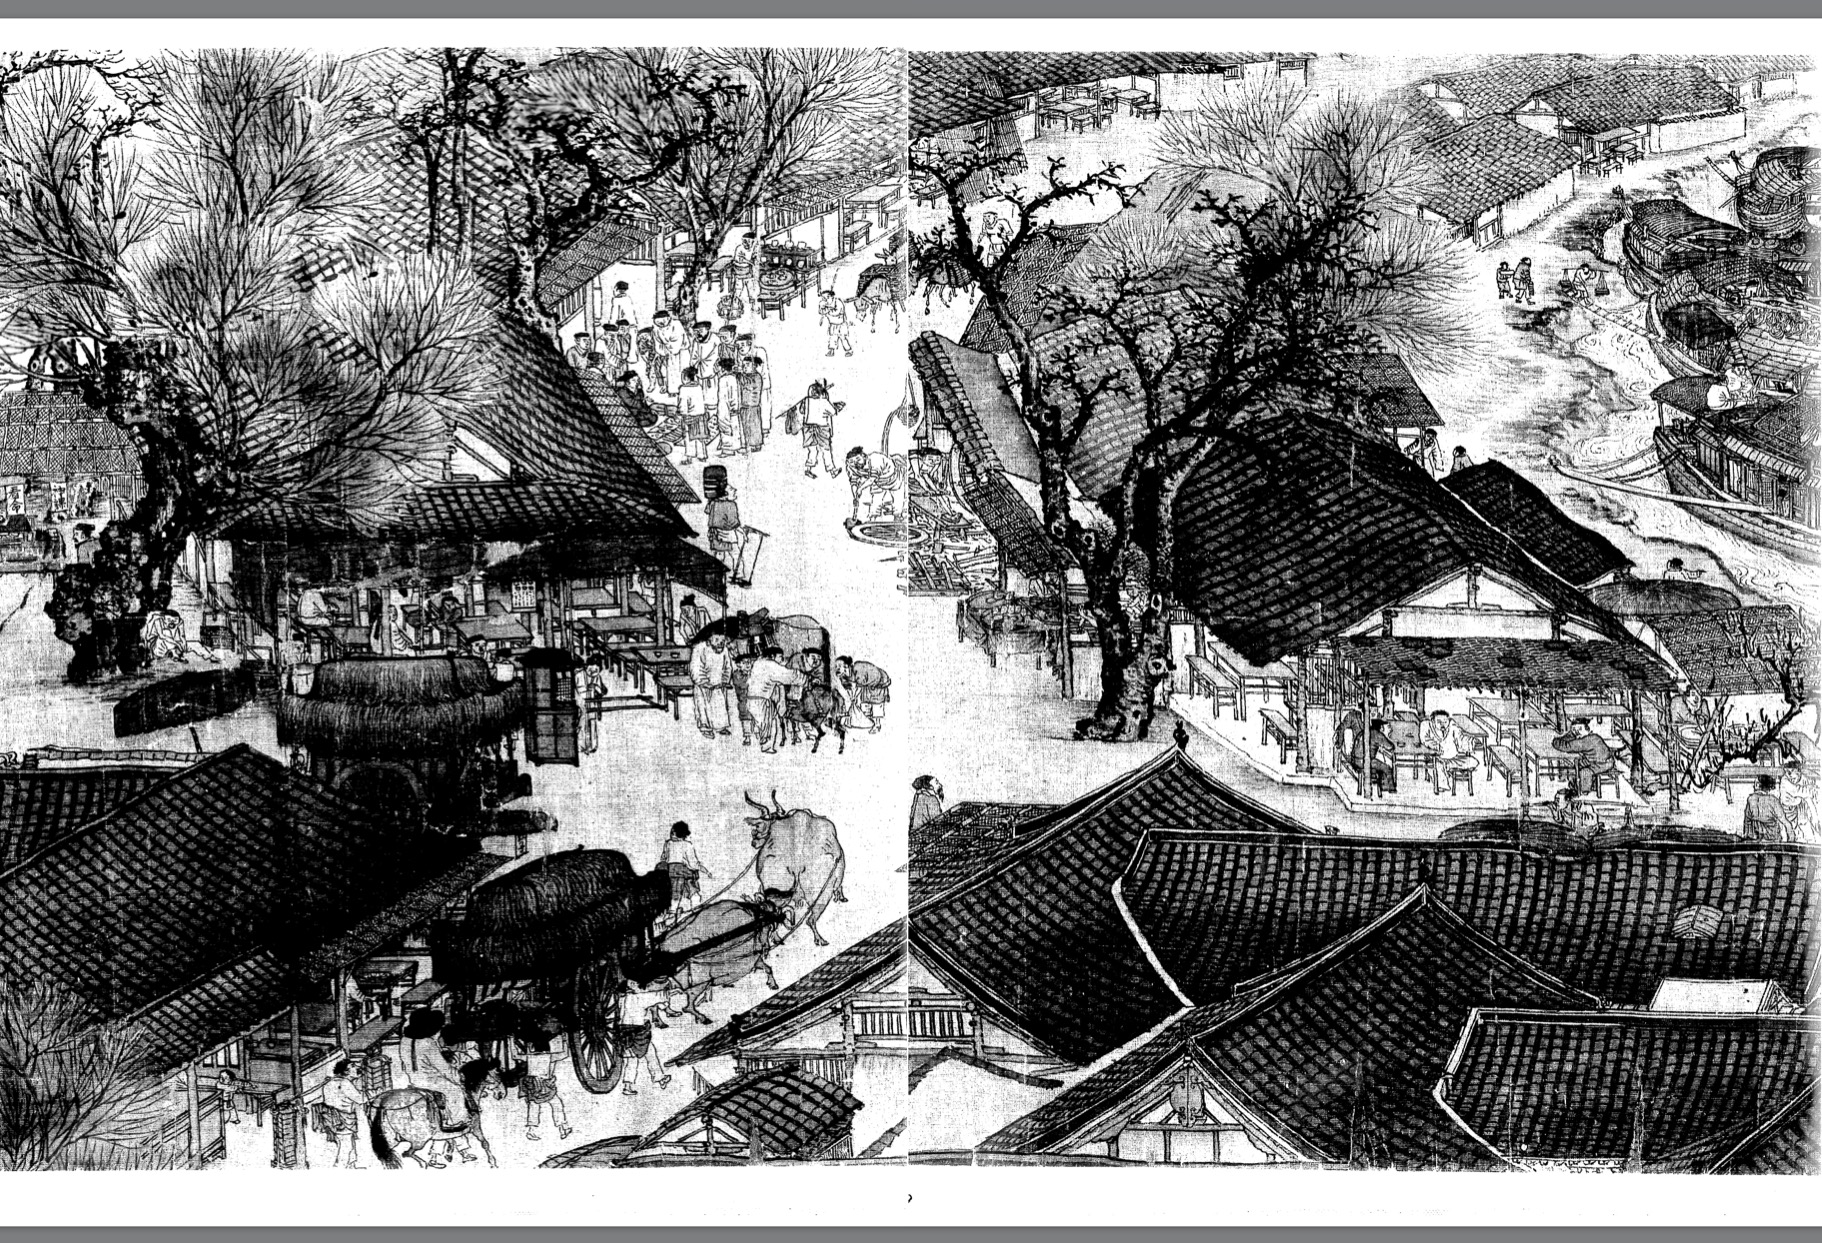 Center: the wheelwright's shop on the "Qingming shanhe tu" scroll.